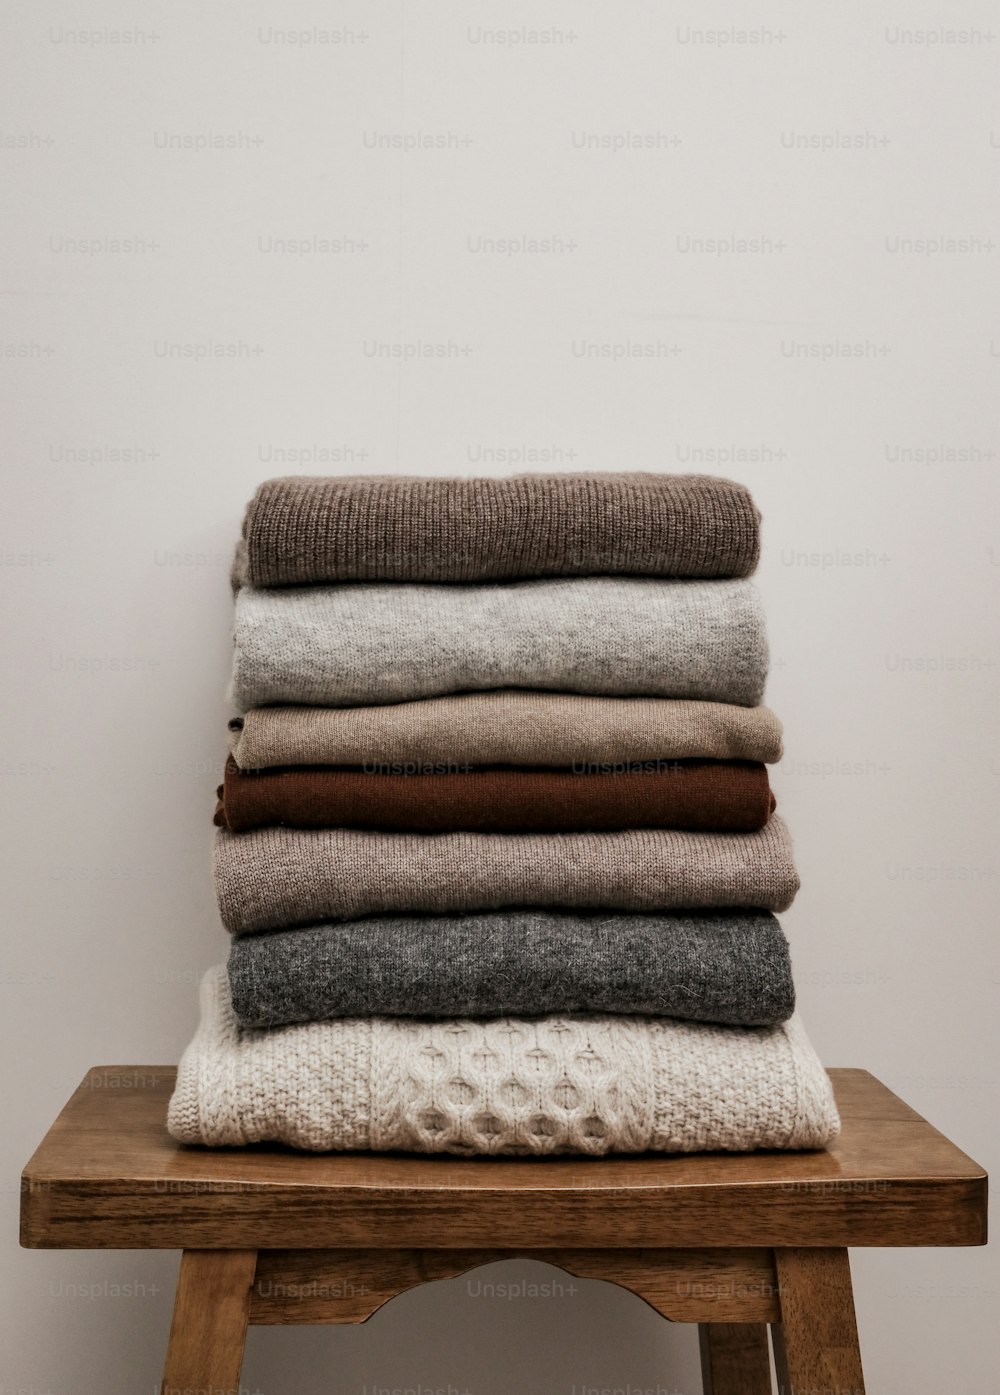 a stack of folded blankets sitting on top of a wooden table